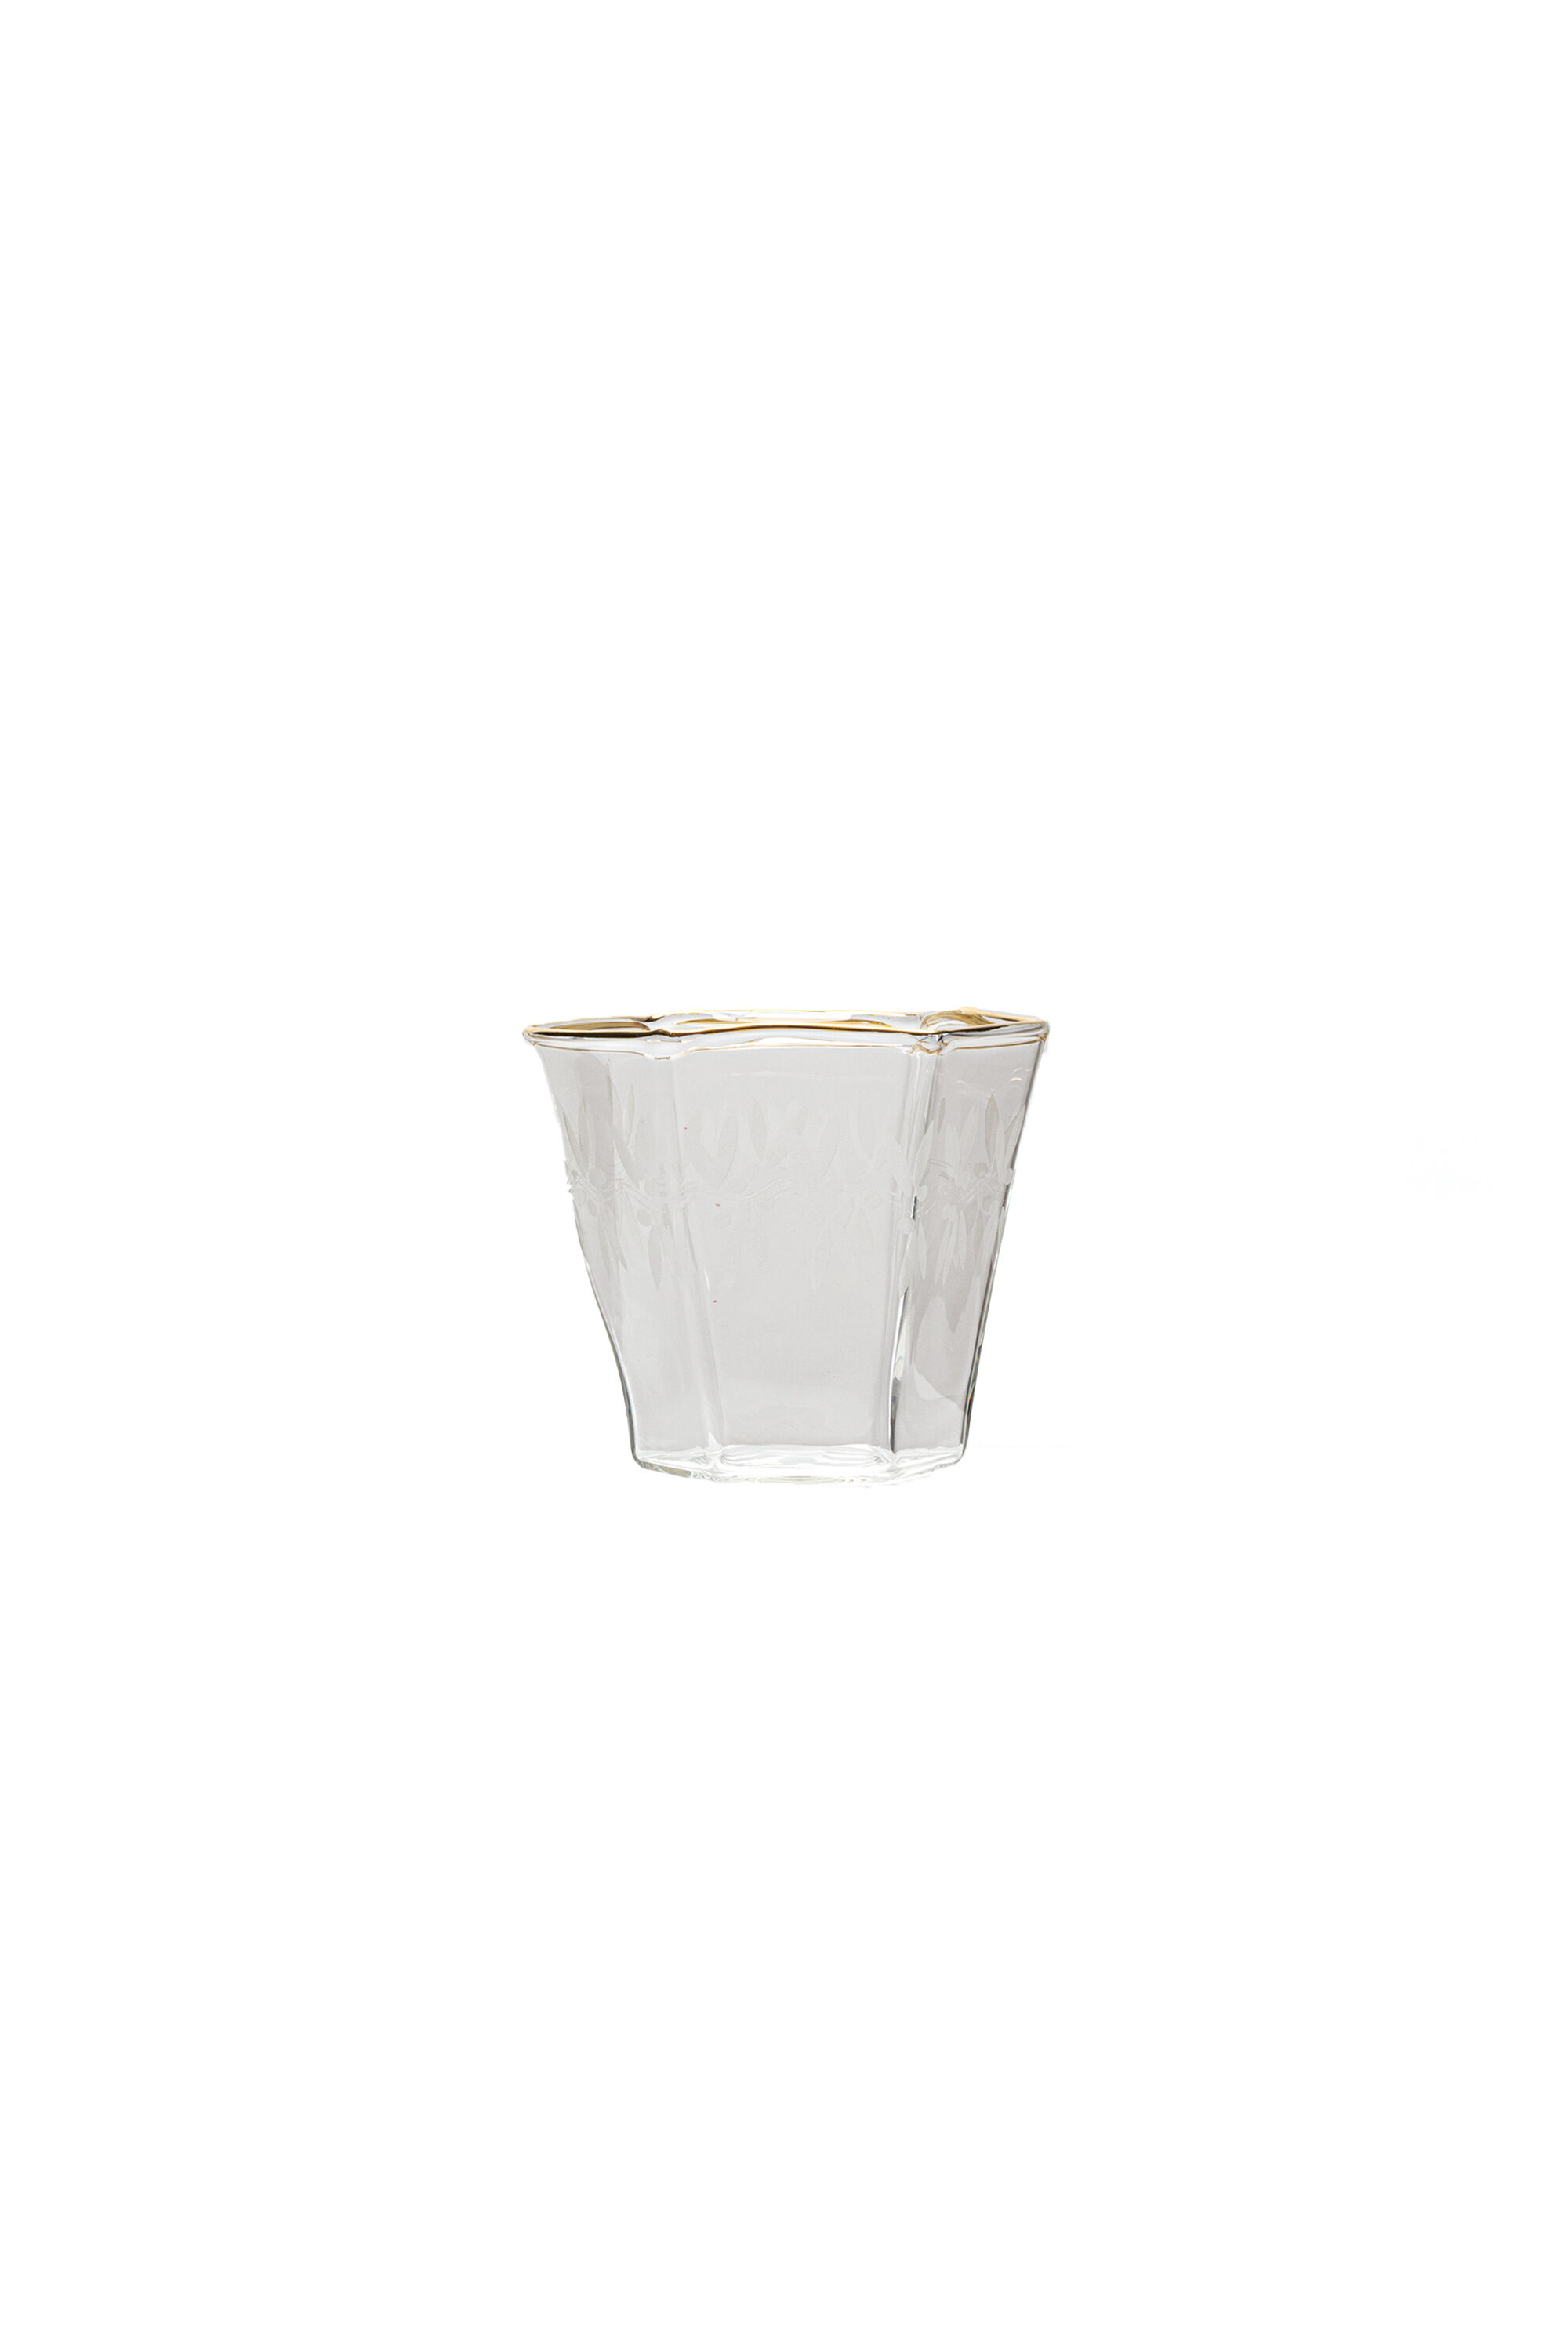 Diesel - 11244 GLASSES "CLASSIC ON ACID - BURANO", Unisex Water glass in White - Image 1